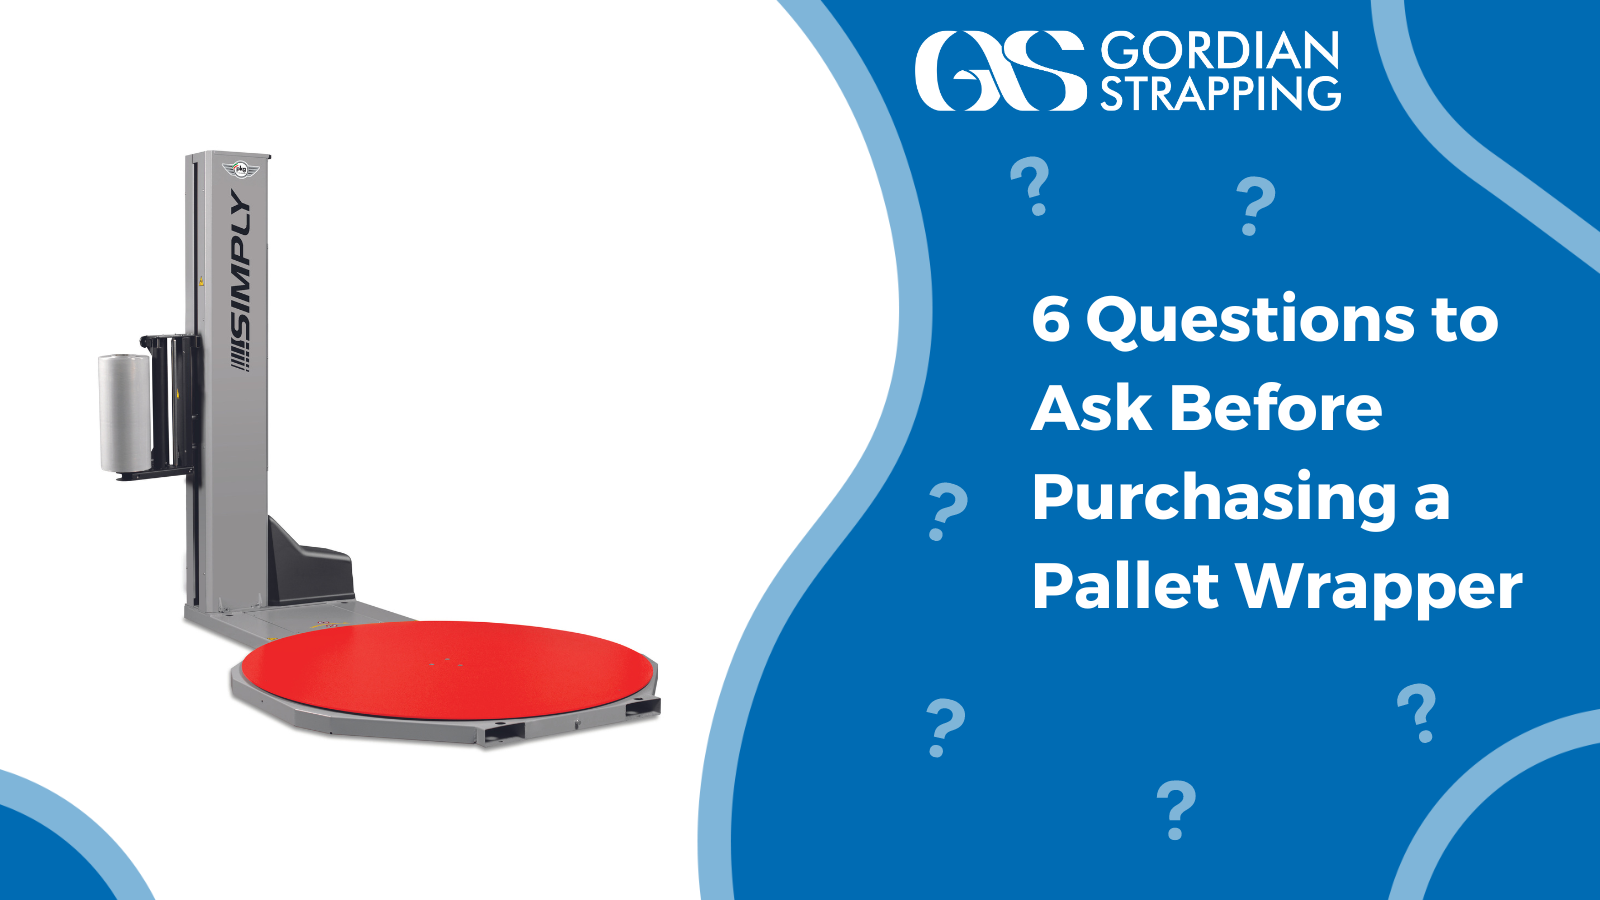 6 Questions to Ask Before Purchasing a Pallet Wrapper